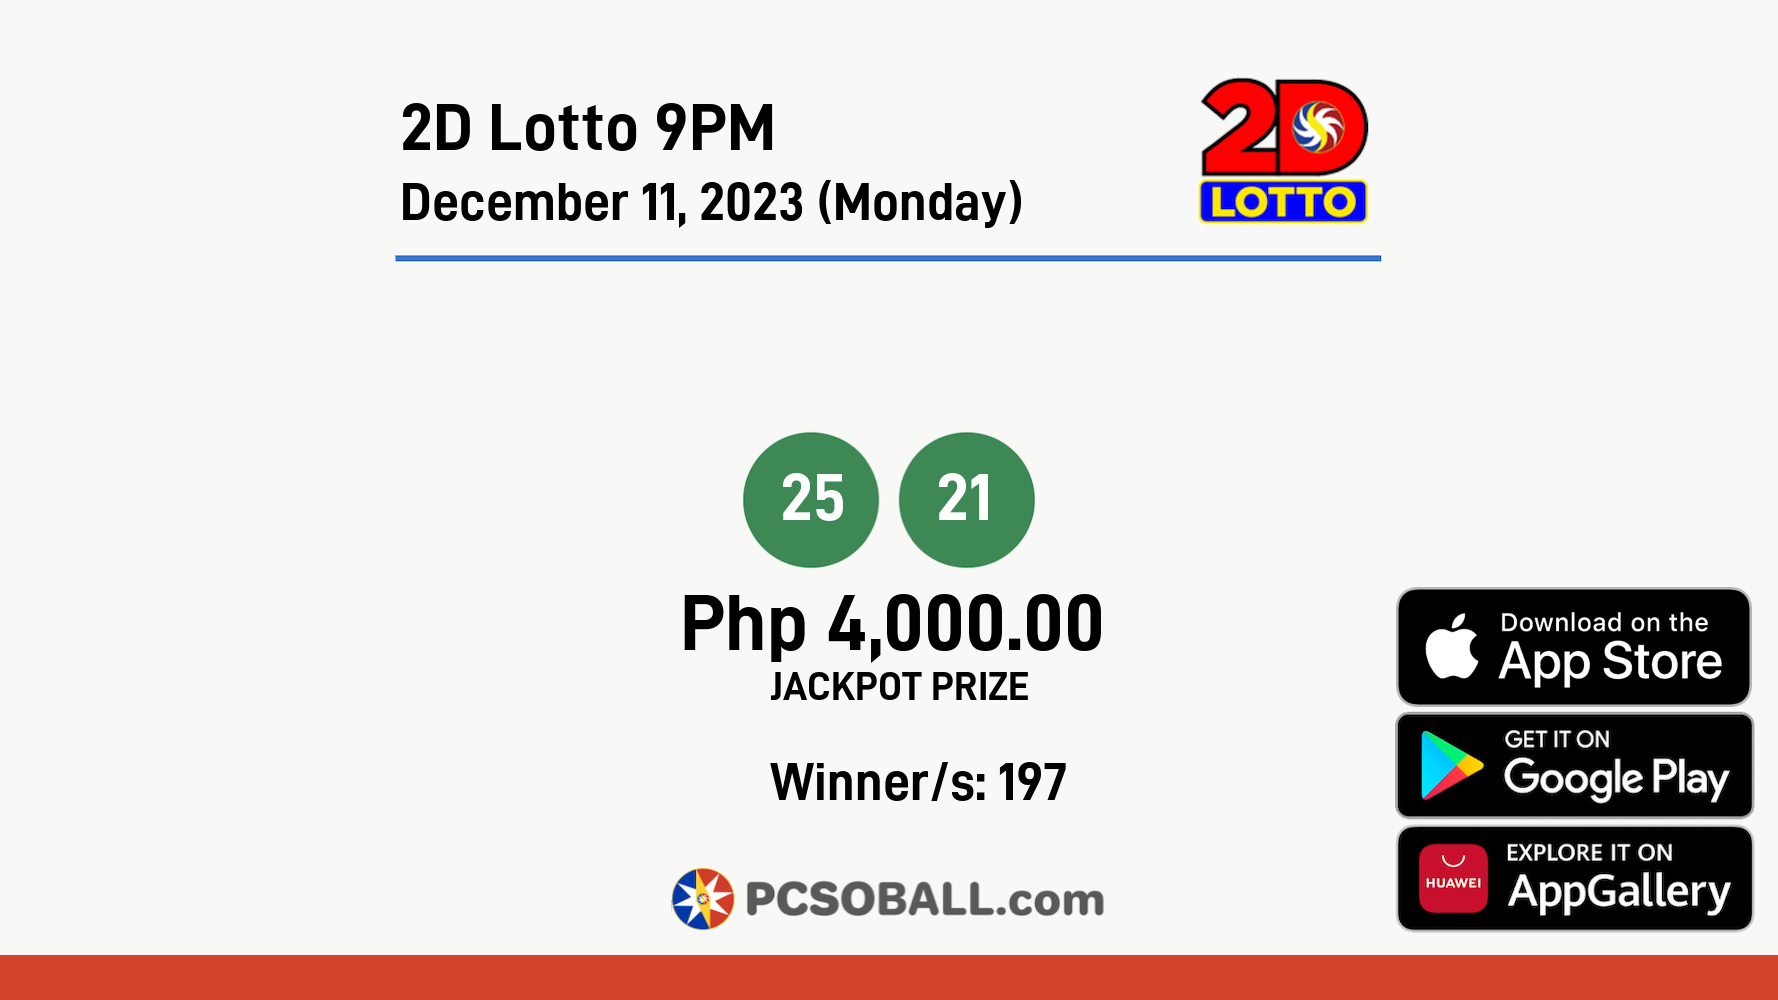 2D Lotto 9PM December 11, 2023 (Monday) Result